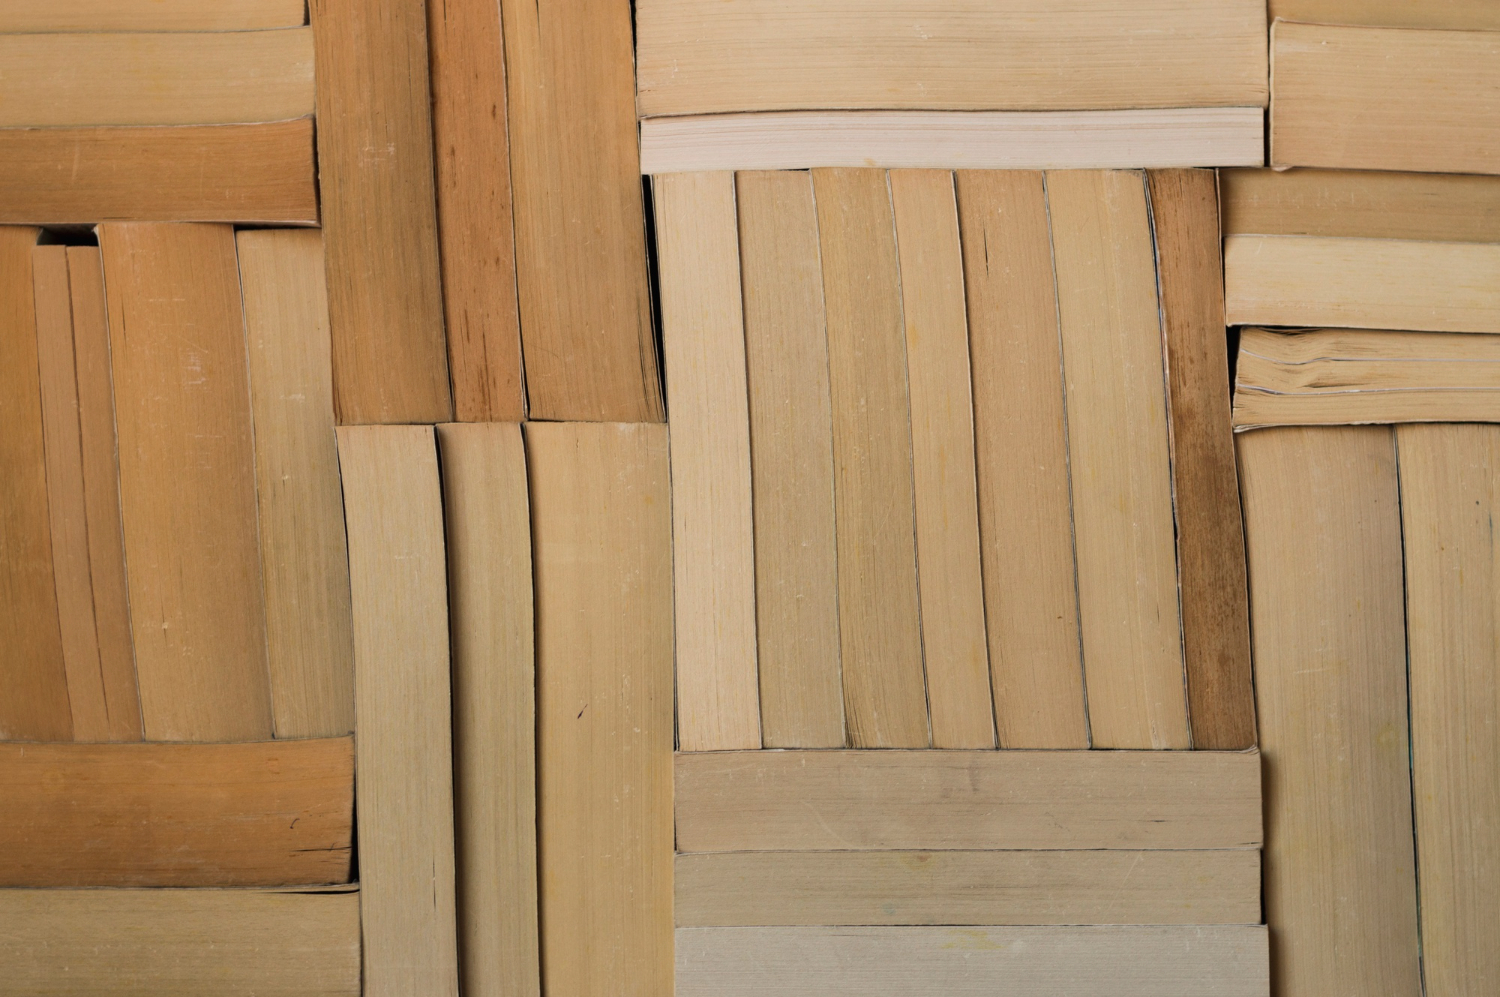 Plywood or MDF: Which is Better for Your Cabinets?